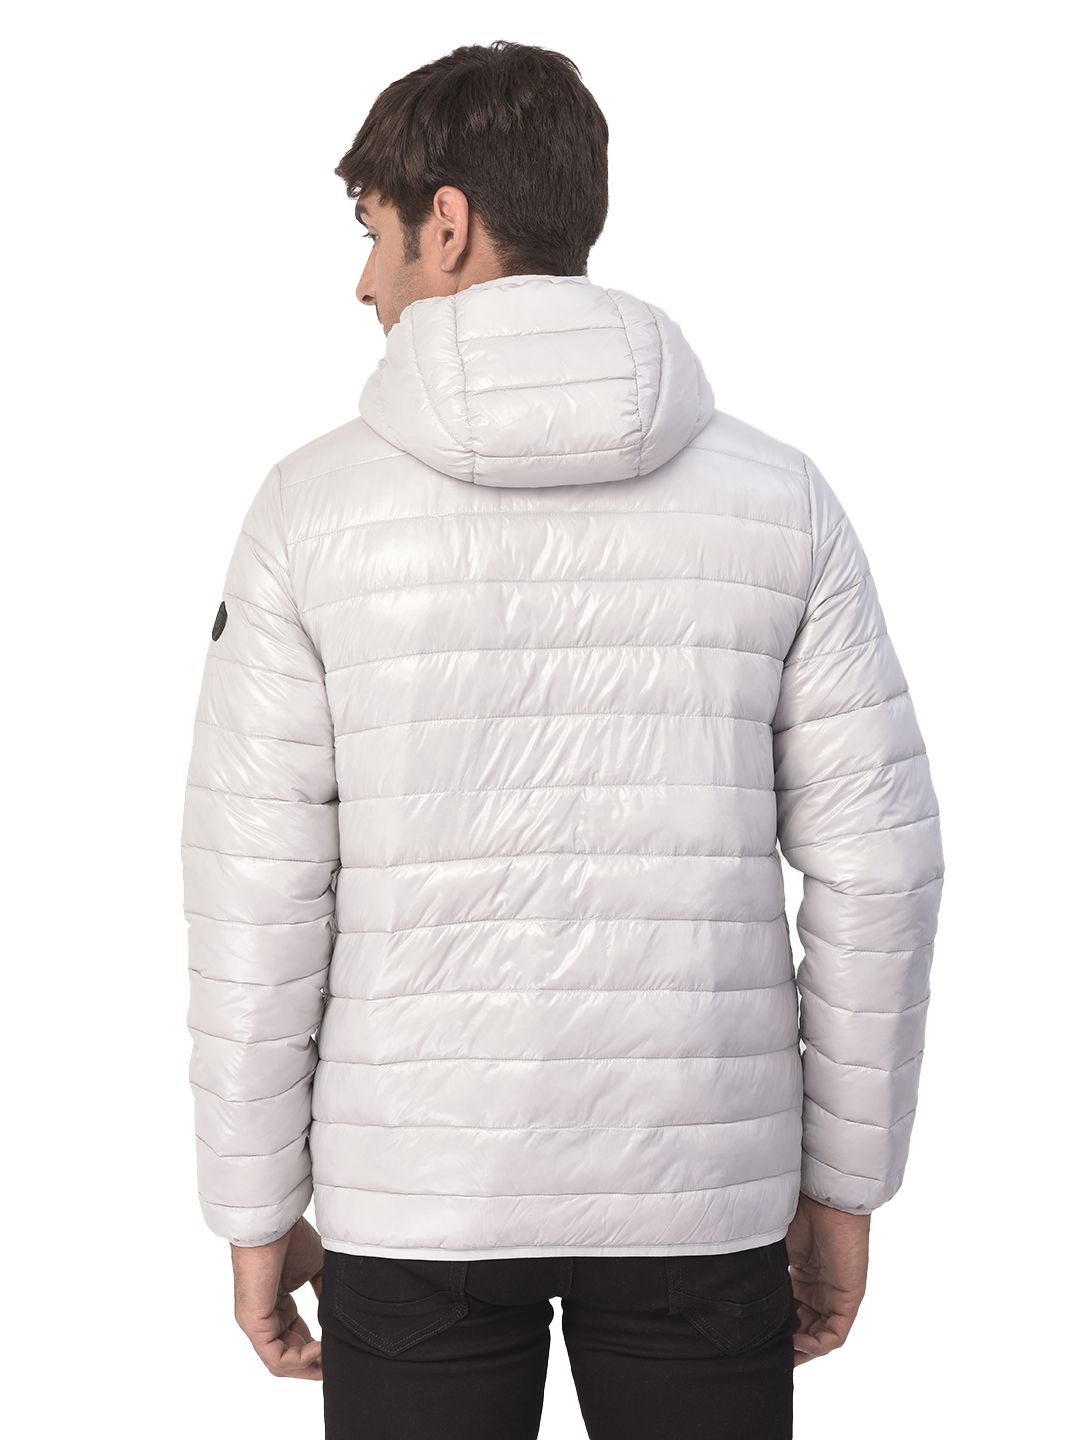 Silver grey quilted jacket for men